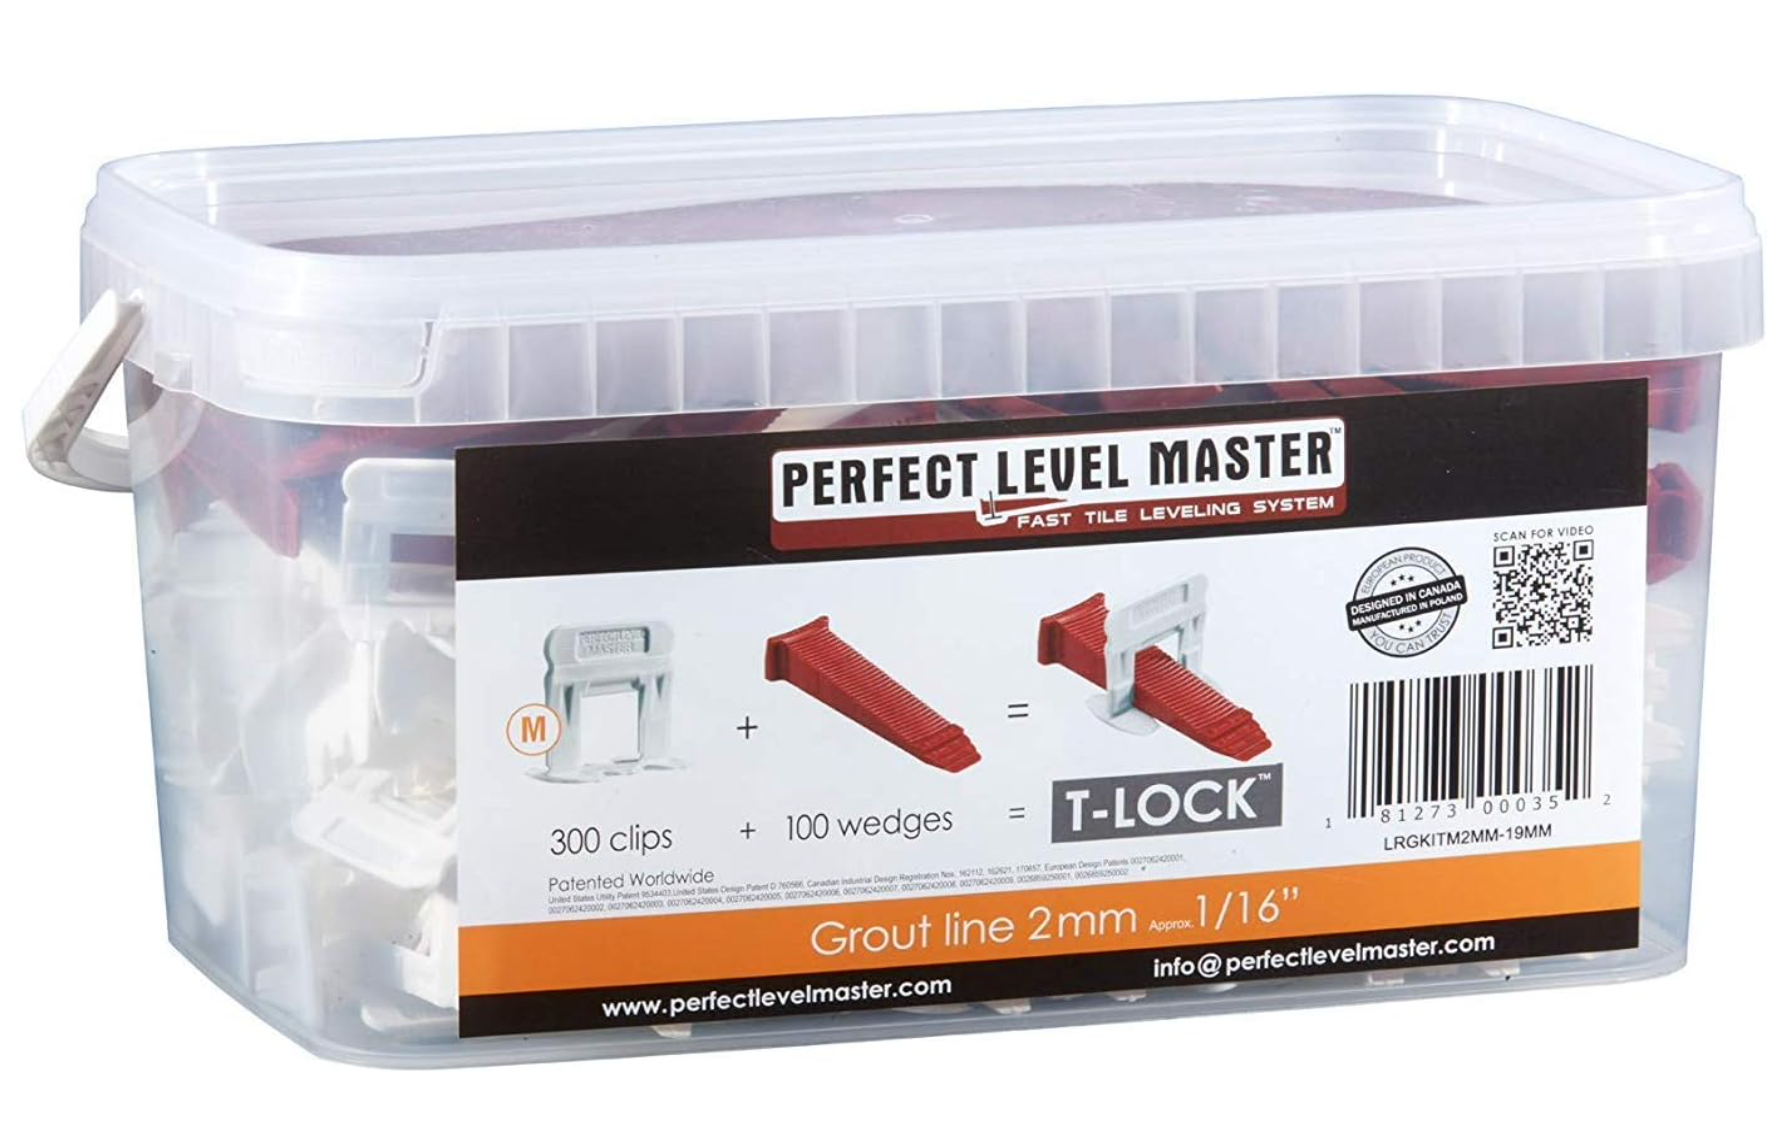 Perfect Level Master - Kit of Wedges and Leveling Clips 2mm (1/16") for tiles from 8 to 14 mm thick